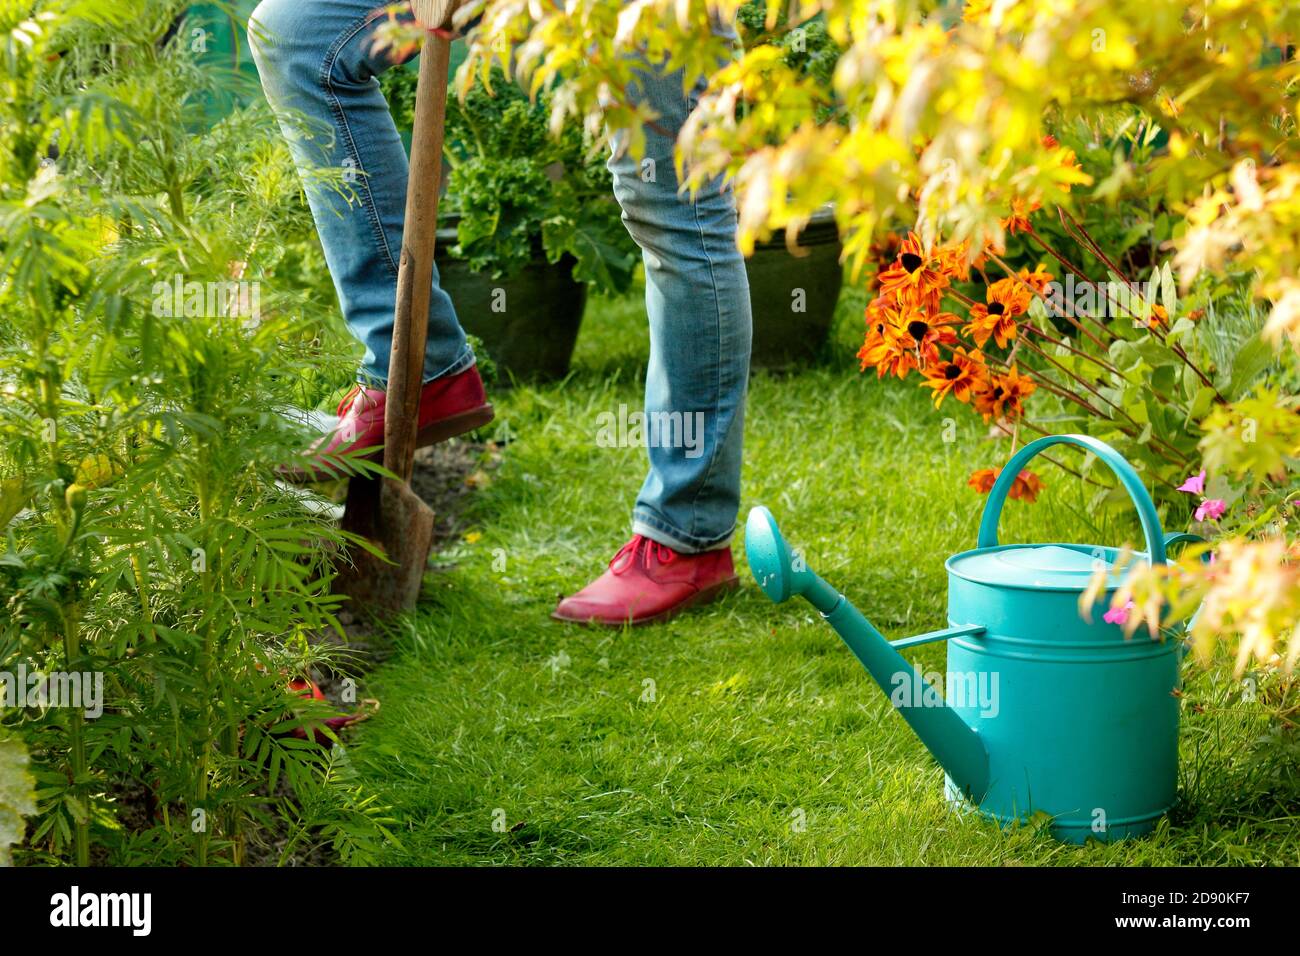 Woman tending a vegetable plot in a back garden in late summer. UK Stock Photo